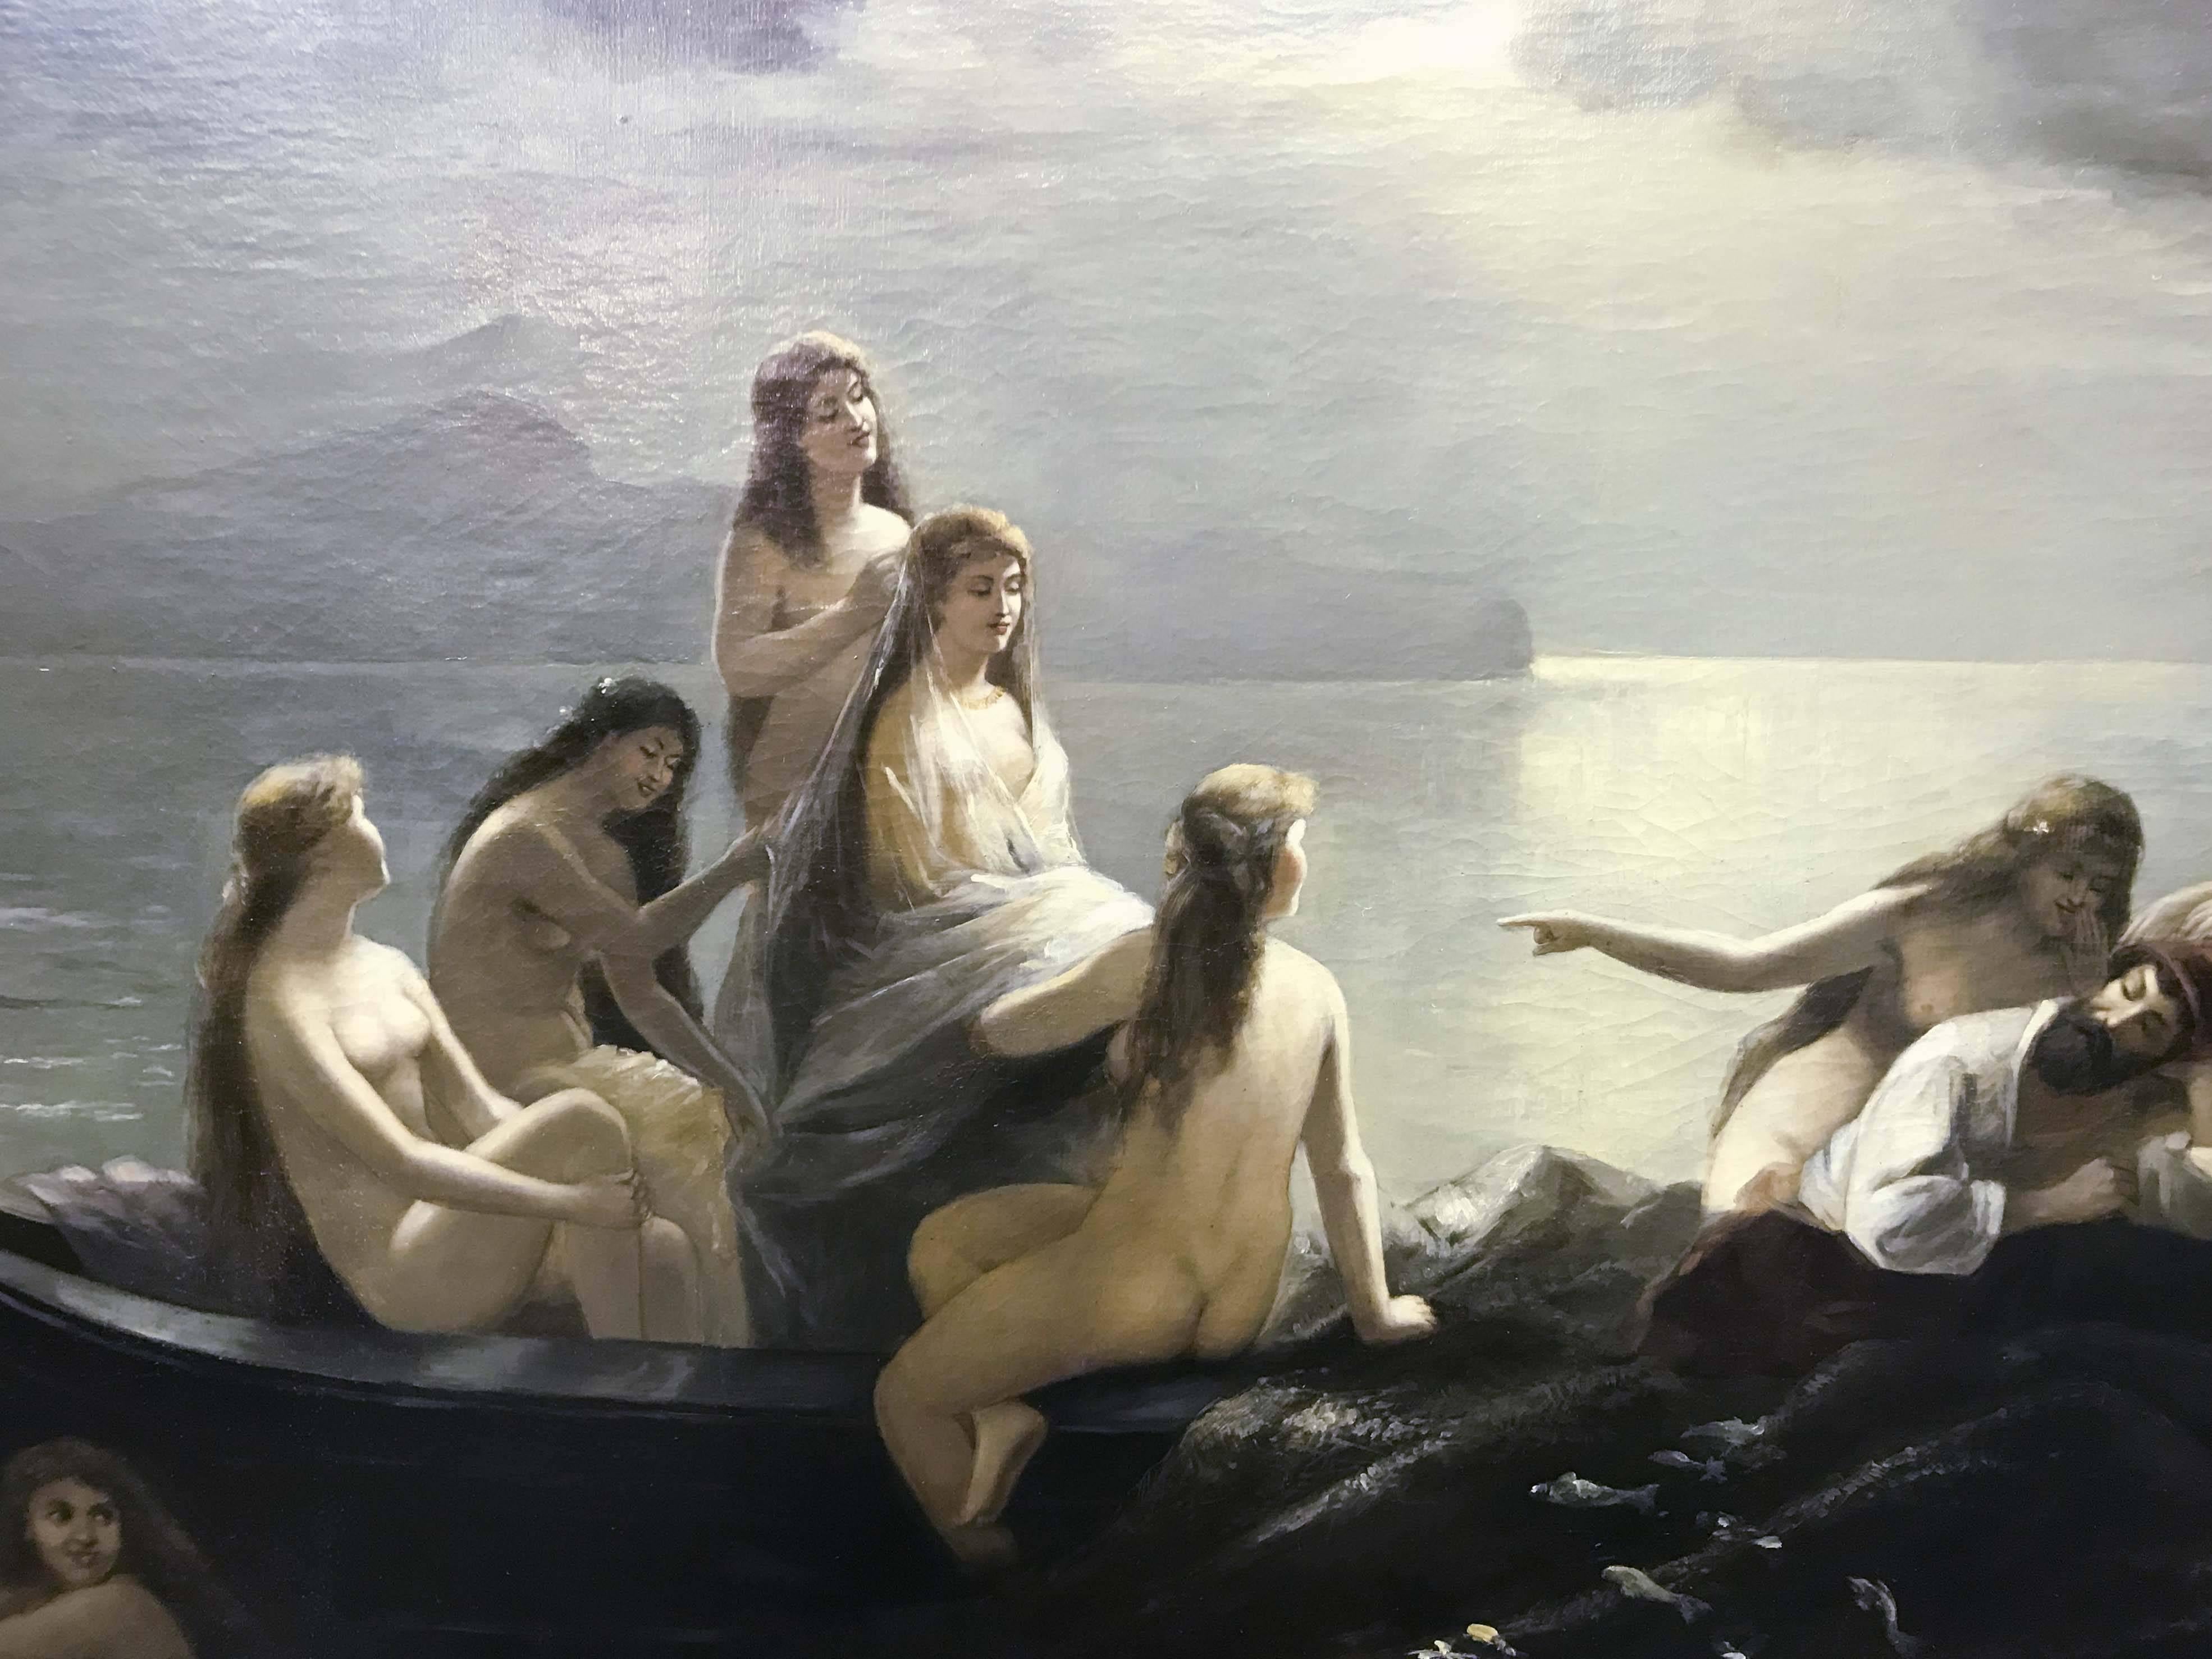 Sirens - Painting by A. Dubois